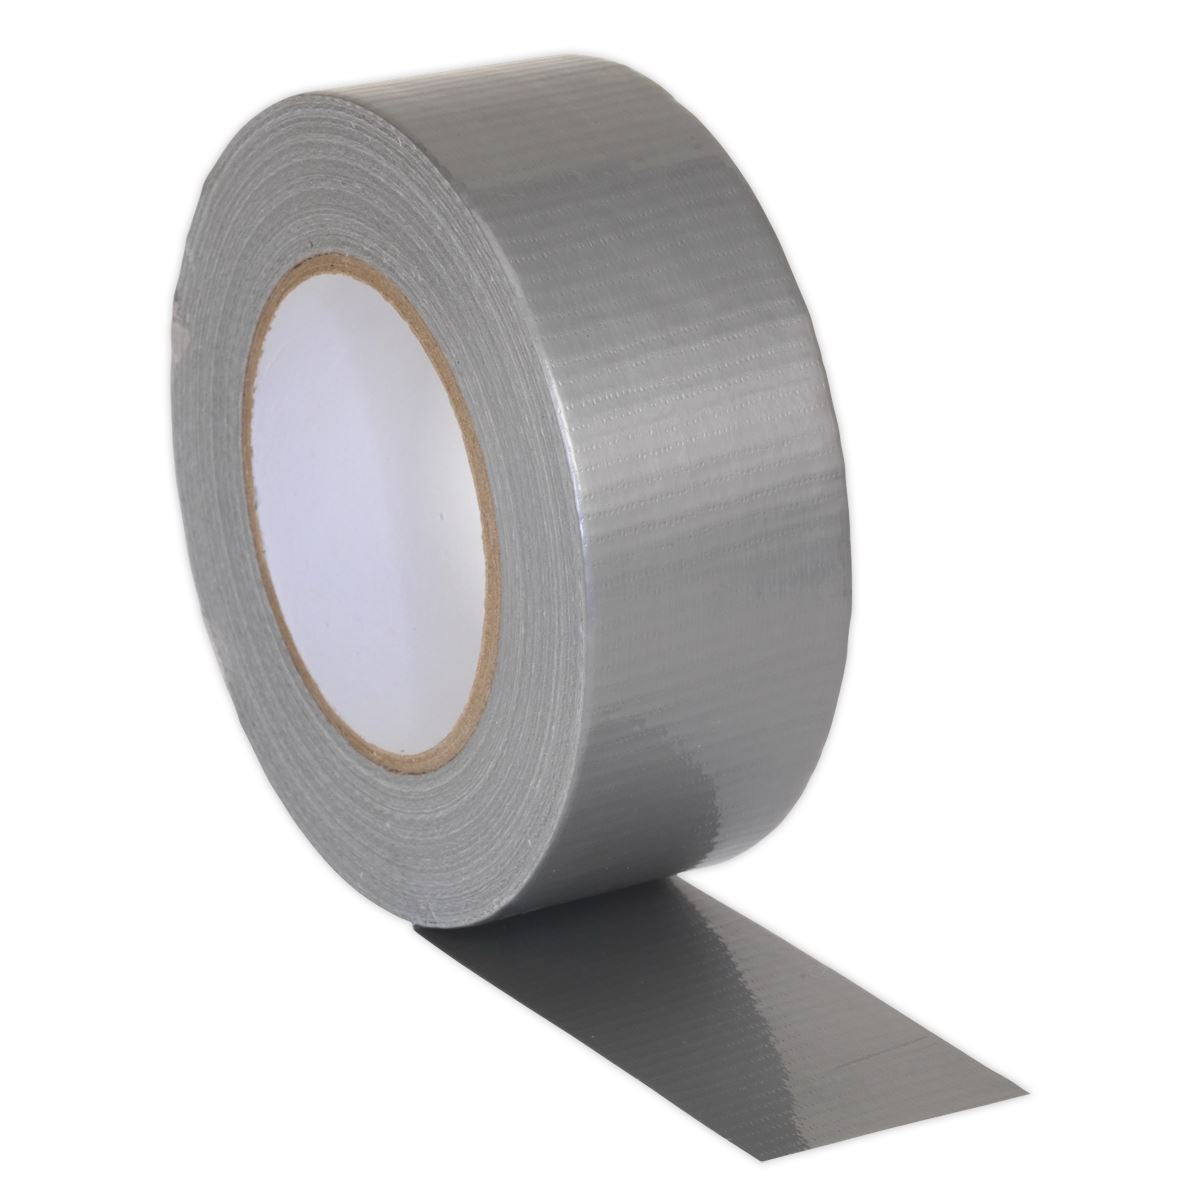 Sealey 48mm x 50m Duct Tape